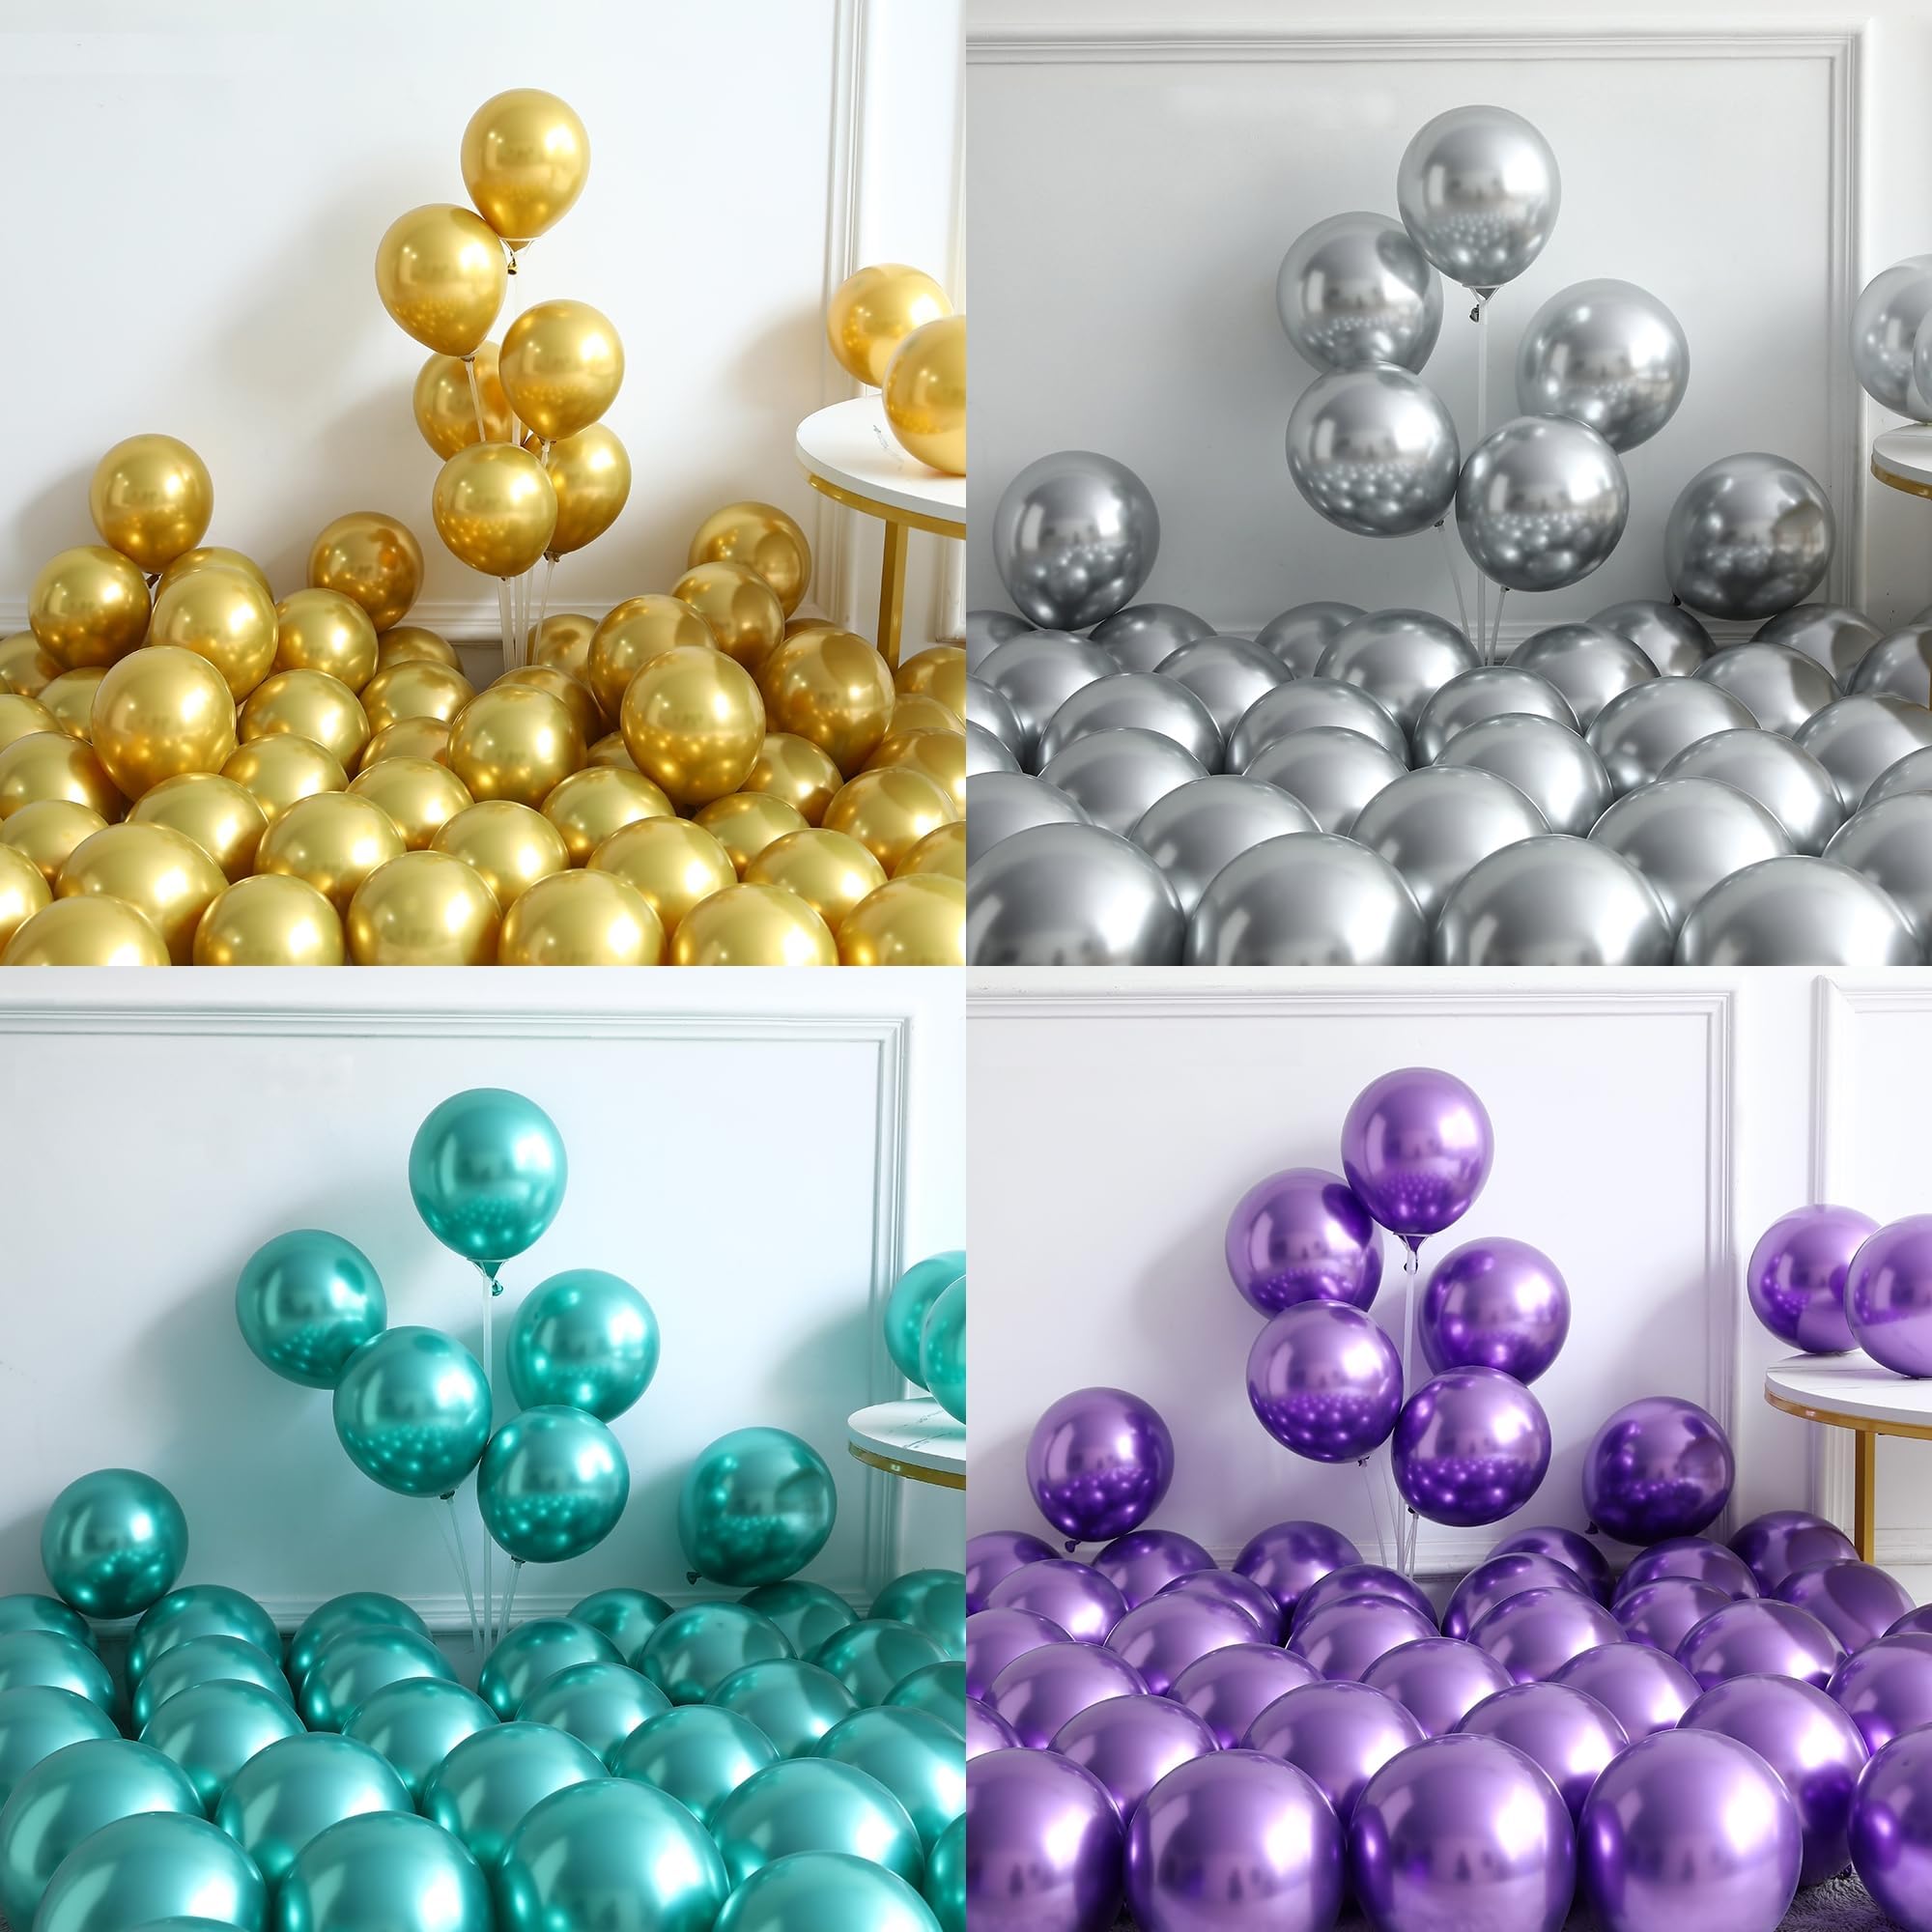 80s 90s Party Decorations 141PCS Disco Ball Balloon Garland Arch Kit with Metallic Gold Silver Balloons Radio Microphone Inflatable for 90s 80s Theme Birthday Party Decorations